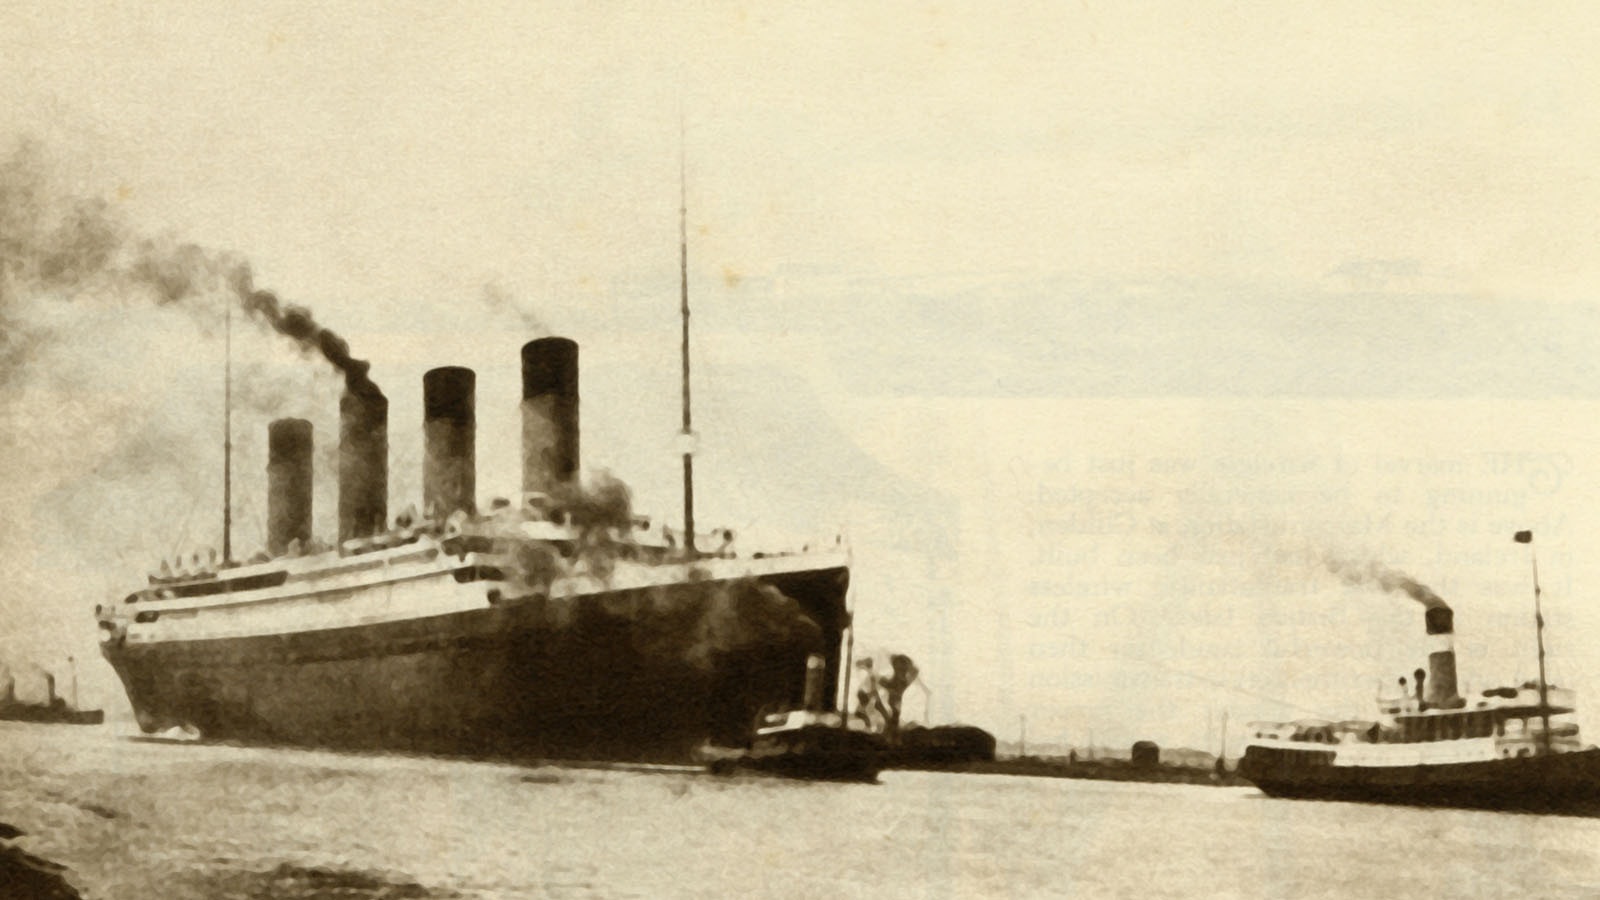 Operated by the White Star Line, Titanic was the largest and most luxurious ocean liner of her time, and thought to be unsinkable. During her maiden voyage, bound for New York, she struck an iceberg in thick fog off Newfoundland on April 14, 1912.